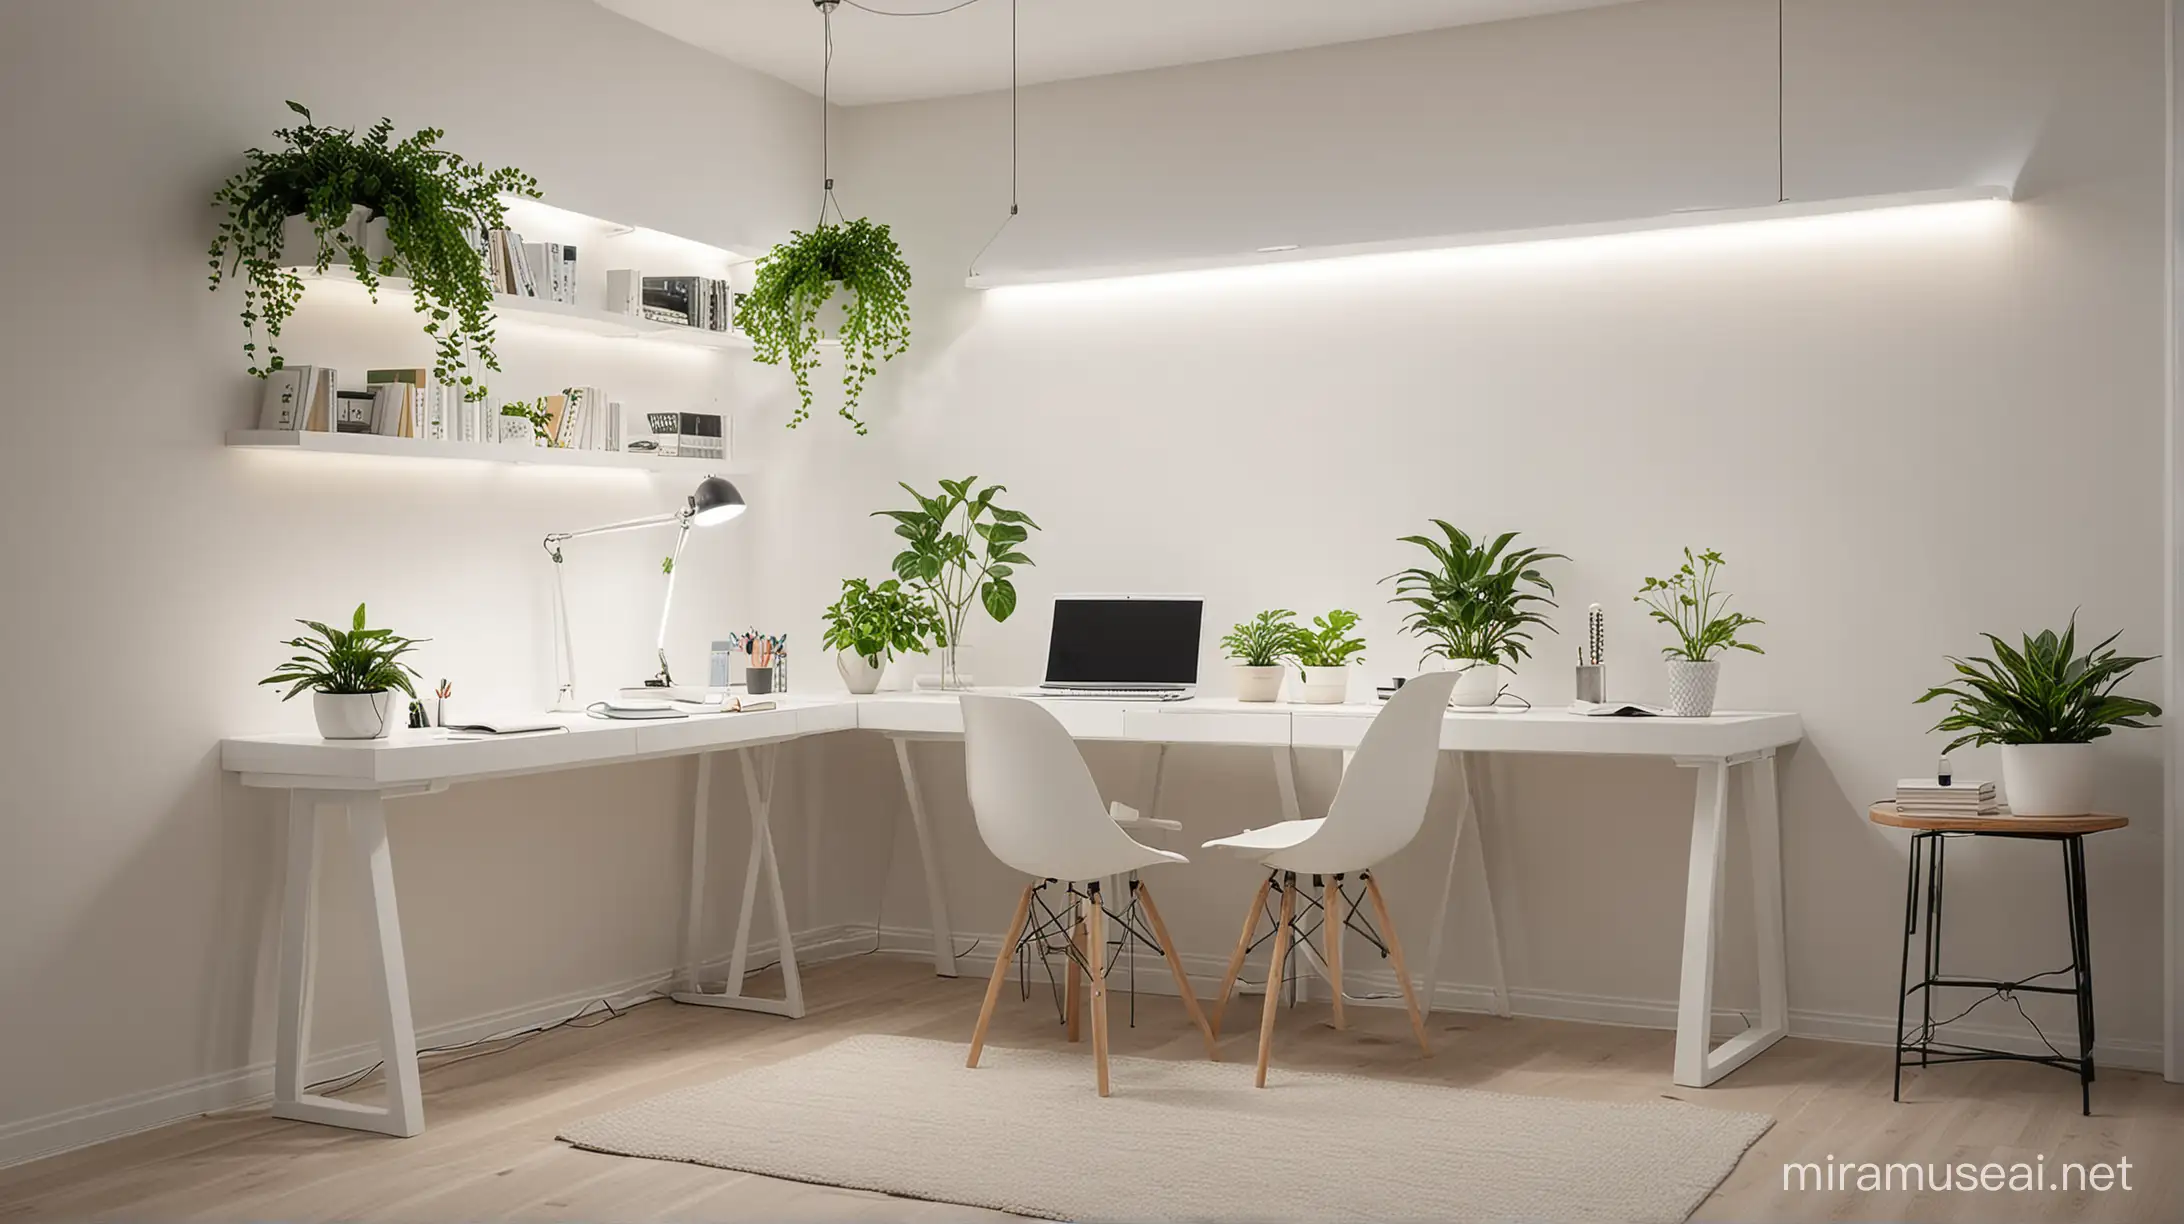 Minimalist White Study Room with Green Plant Arrangement and Decorative Lights